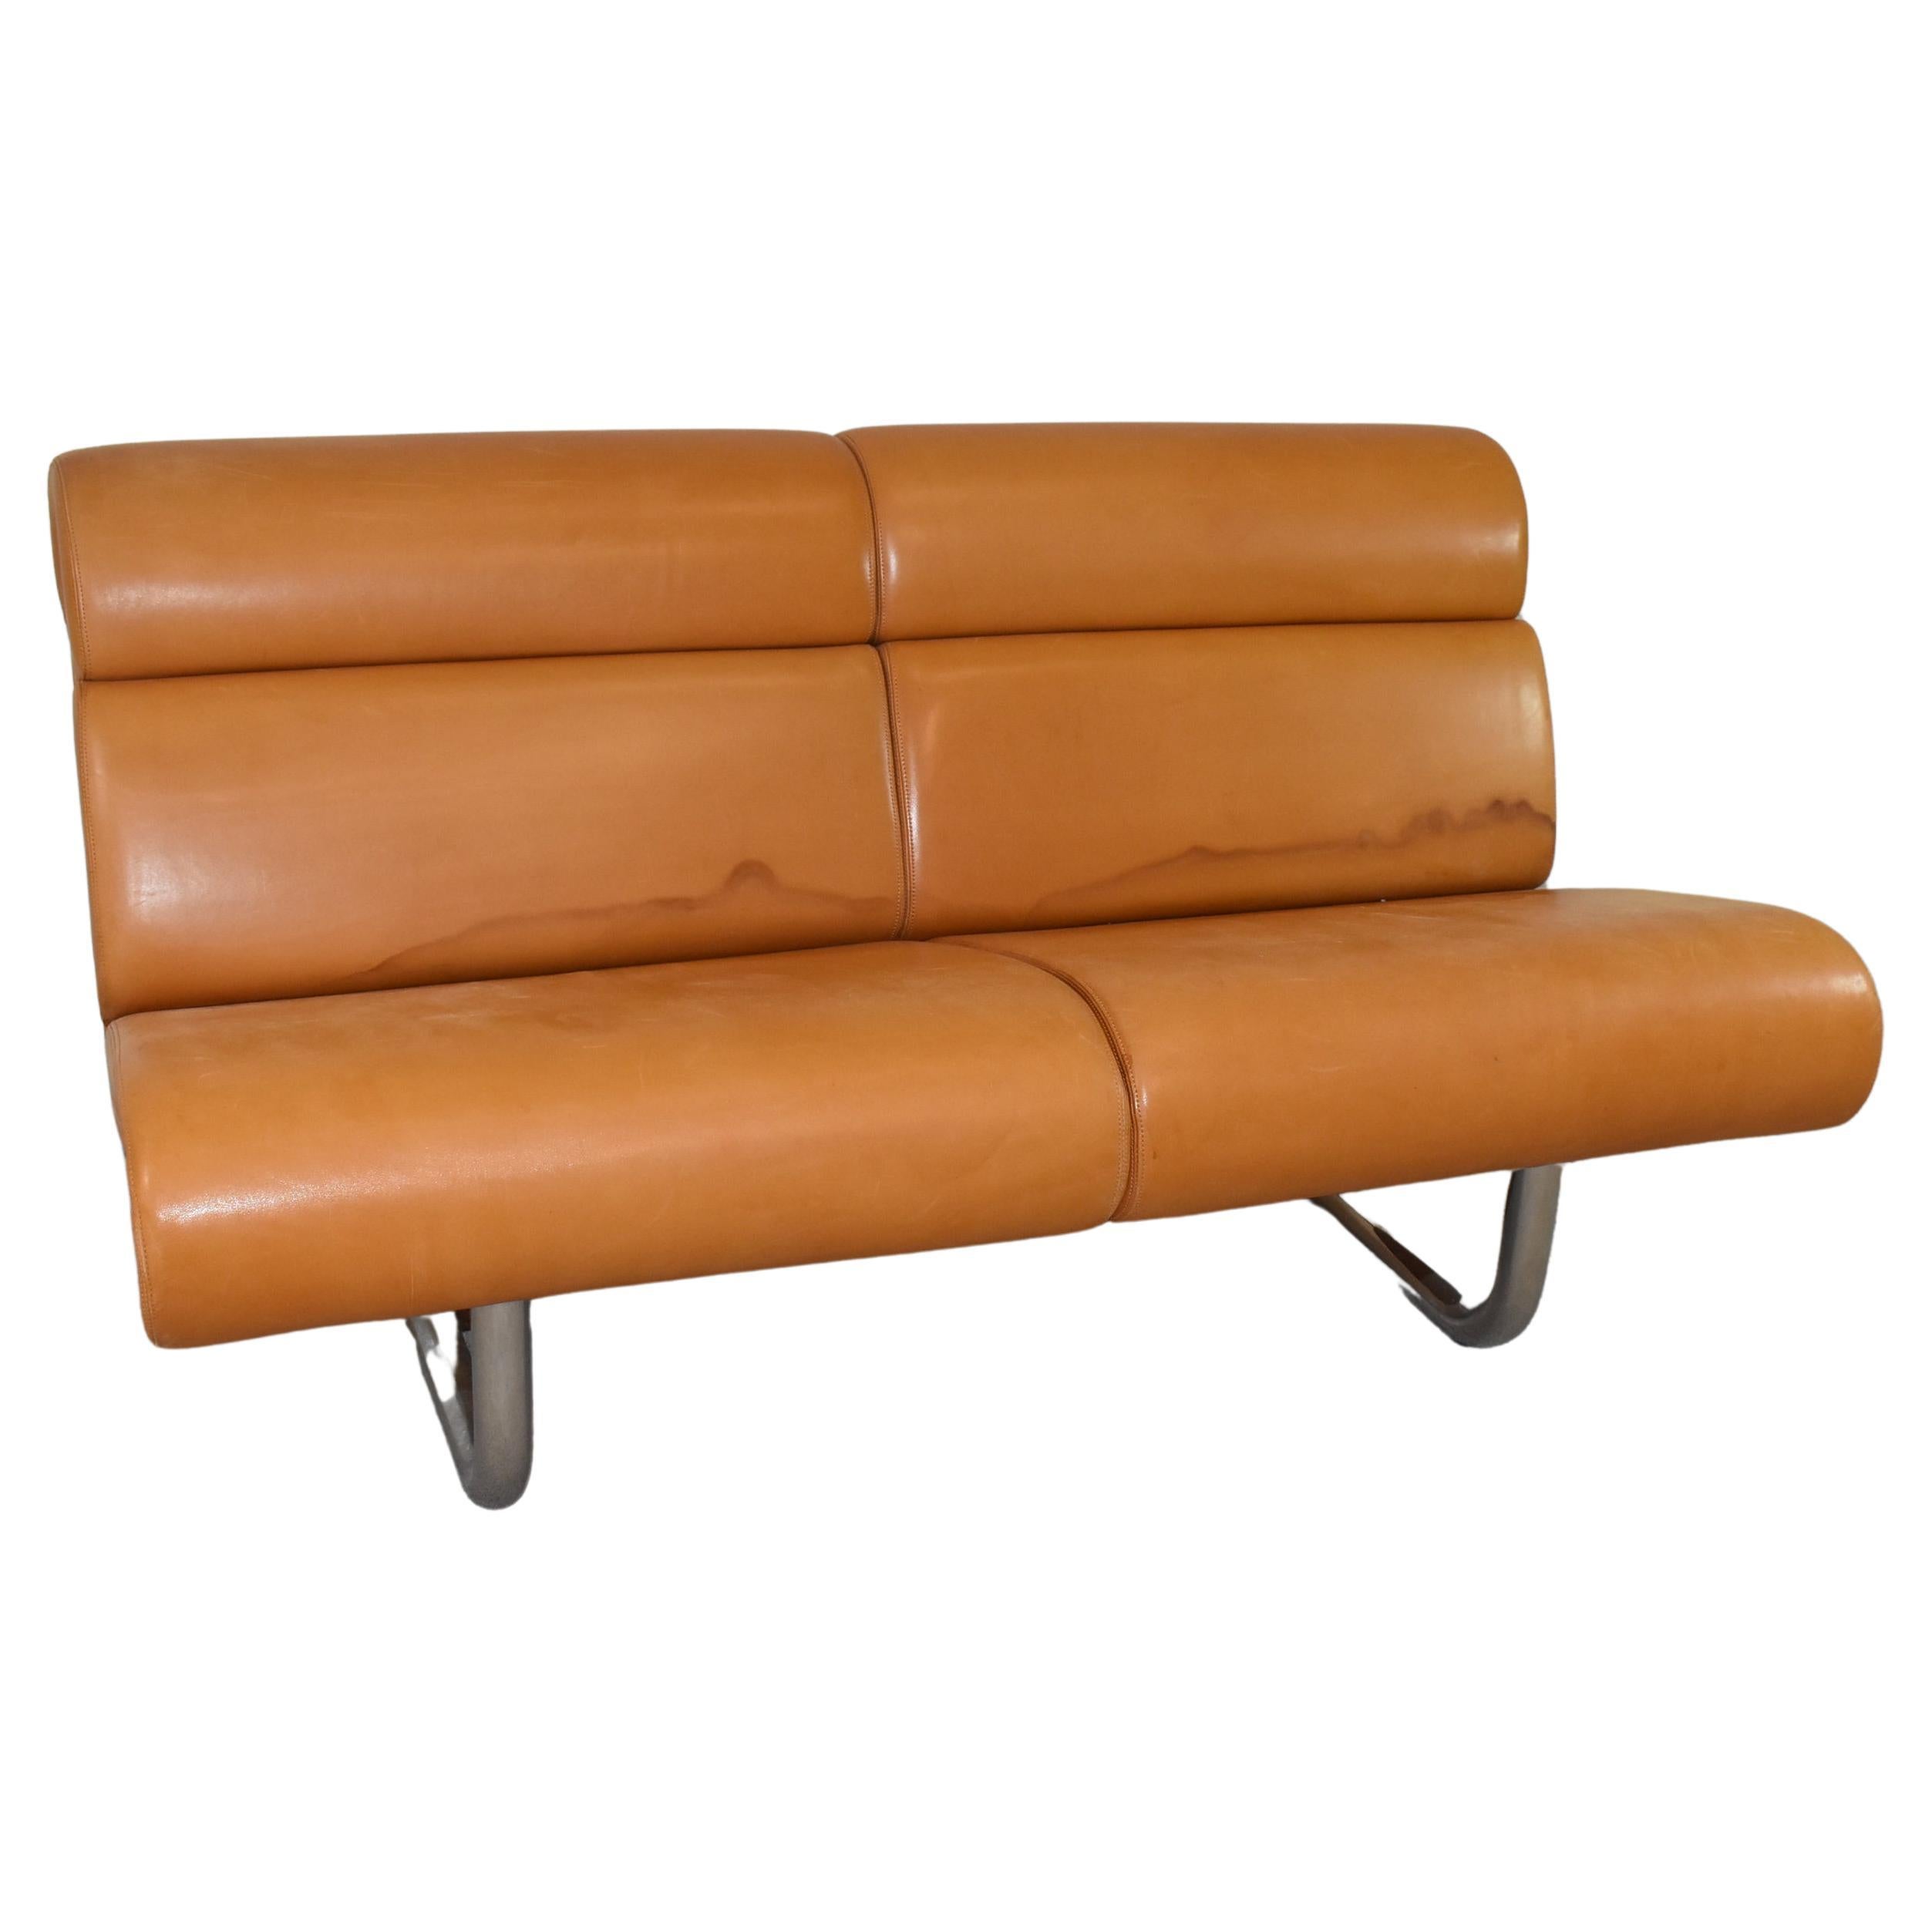 Tan Leather Sofa by Richard Schultz for Knoll